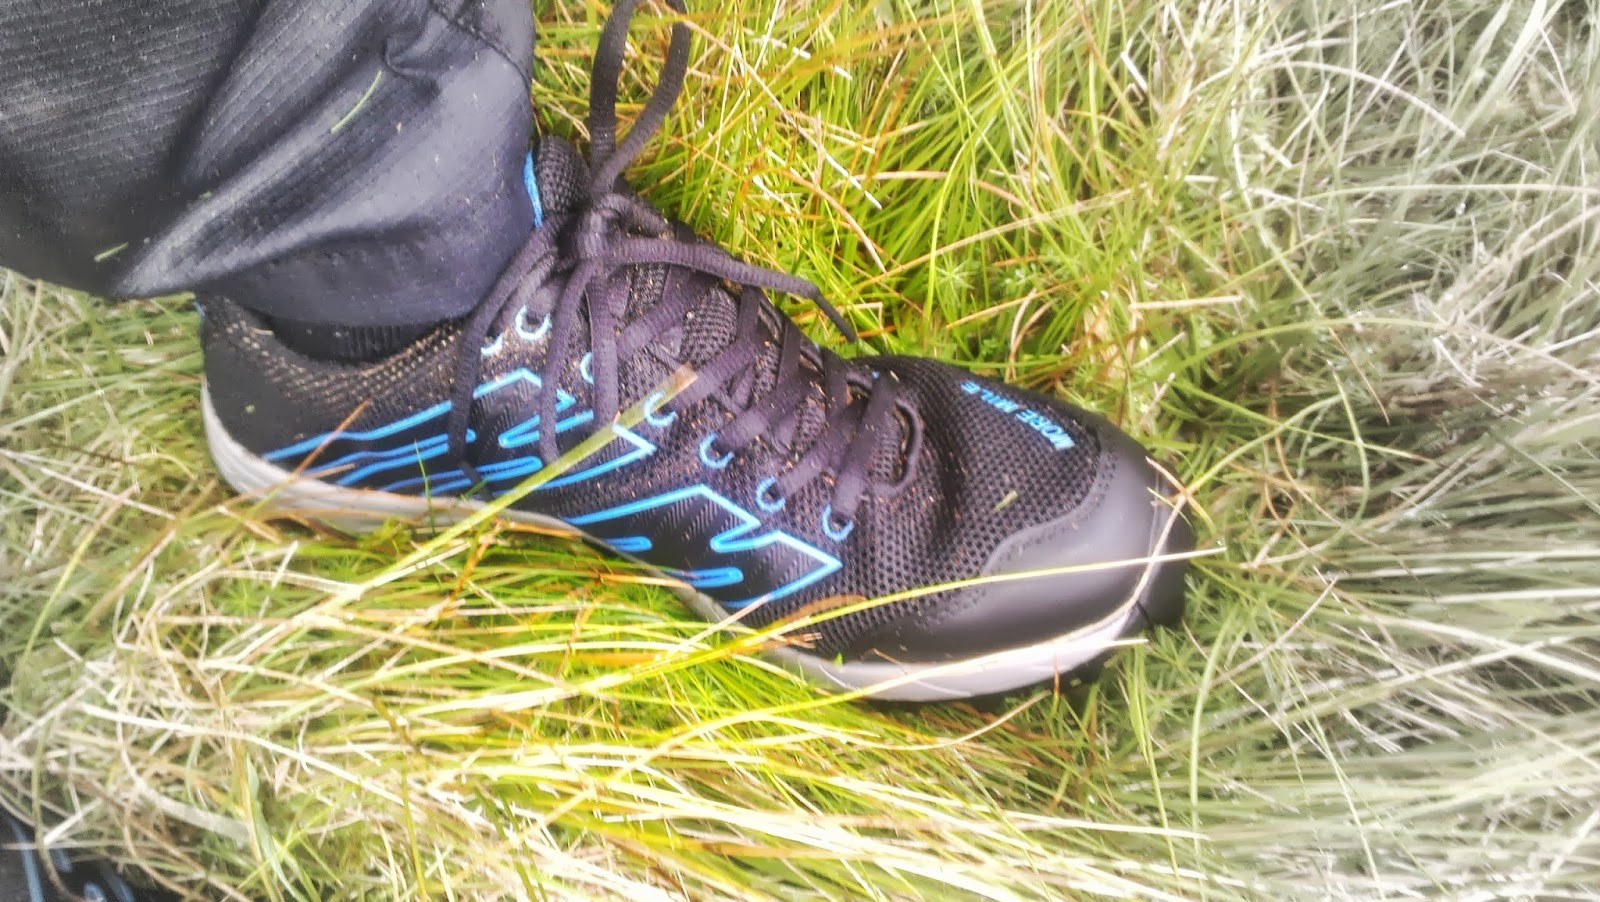 adventure in mind: More Mile Cheviot 2 Fell Shoes